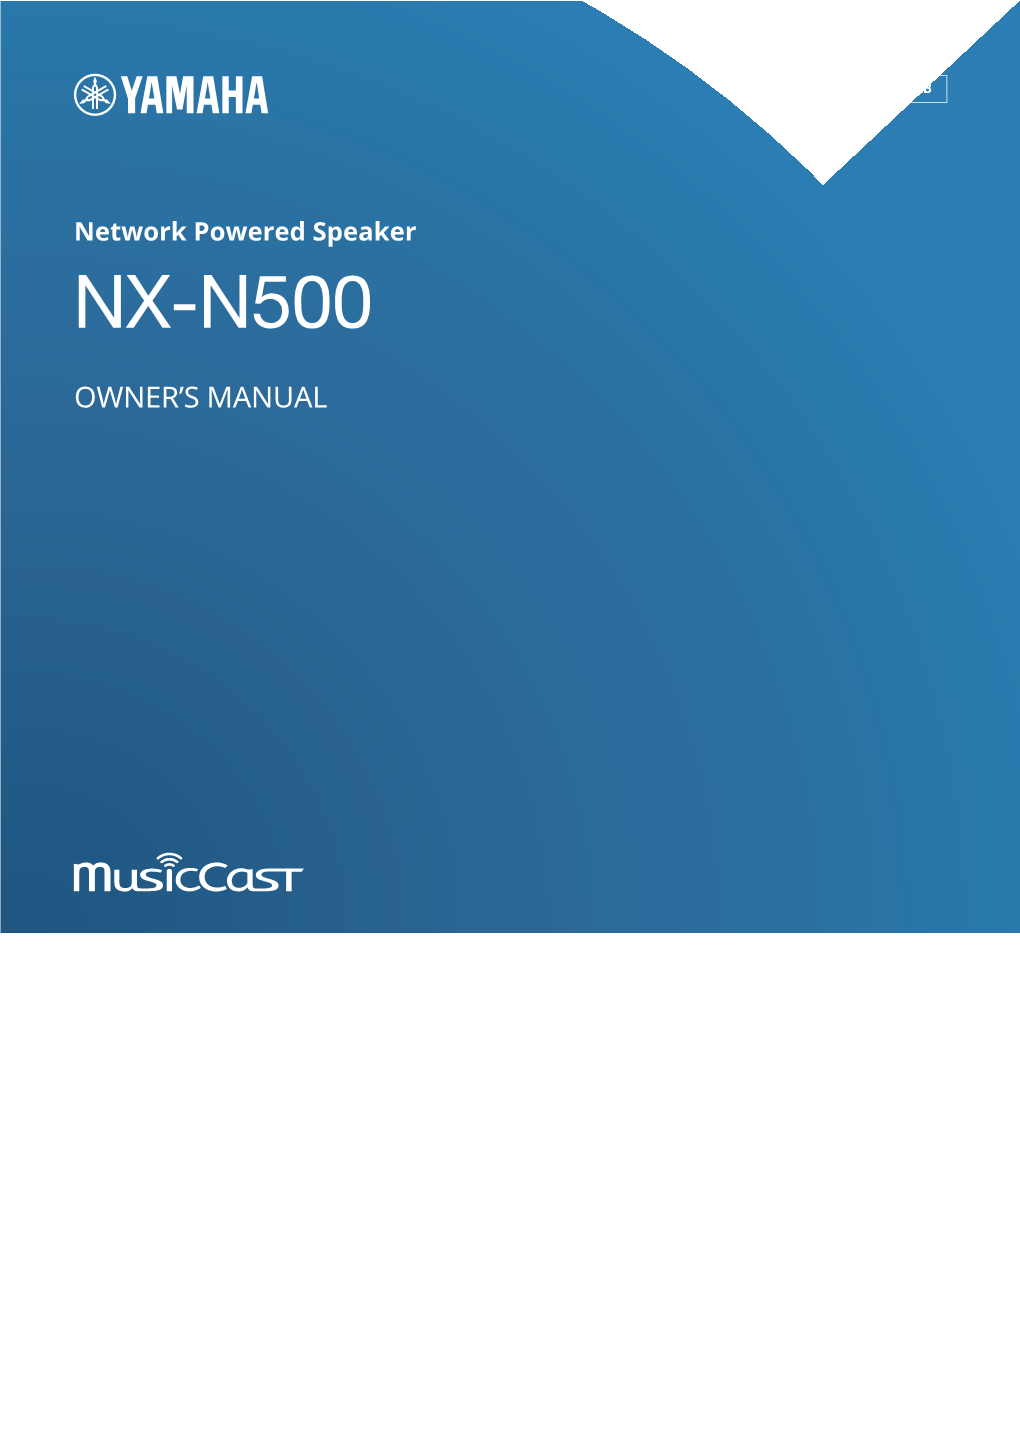 NX-N500 XXXXXX Bluetooth” in the If No Bluetooth Device Has Been Registered Yet, the Status Bluetooth Device List on the Device